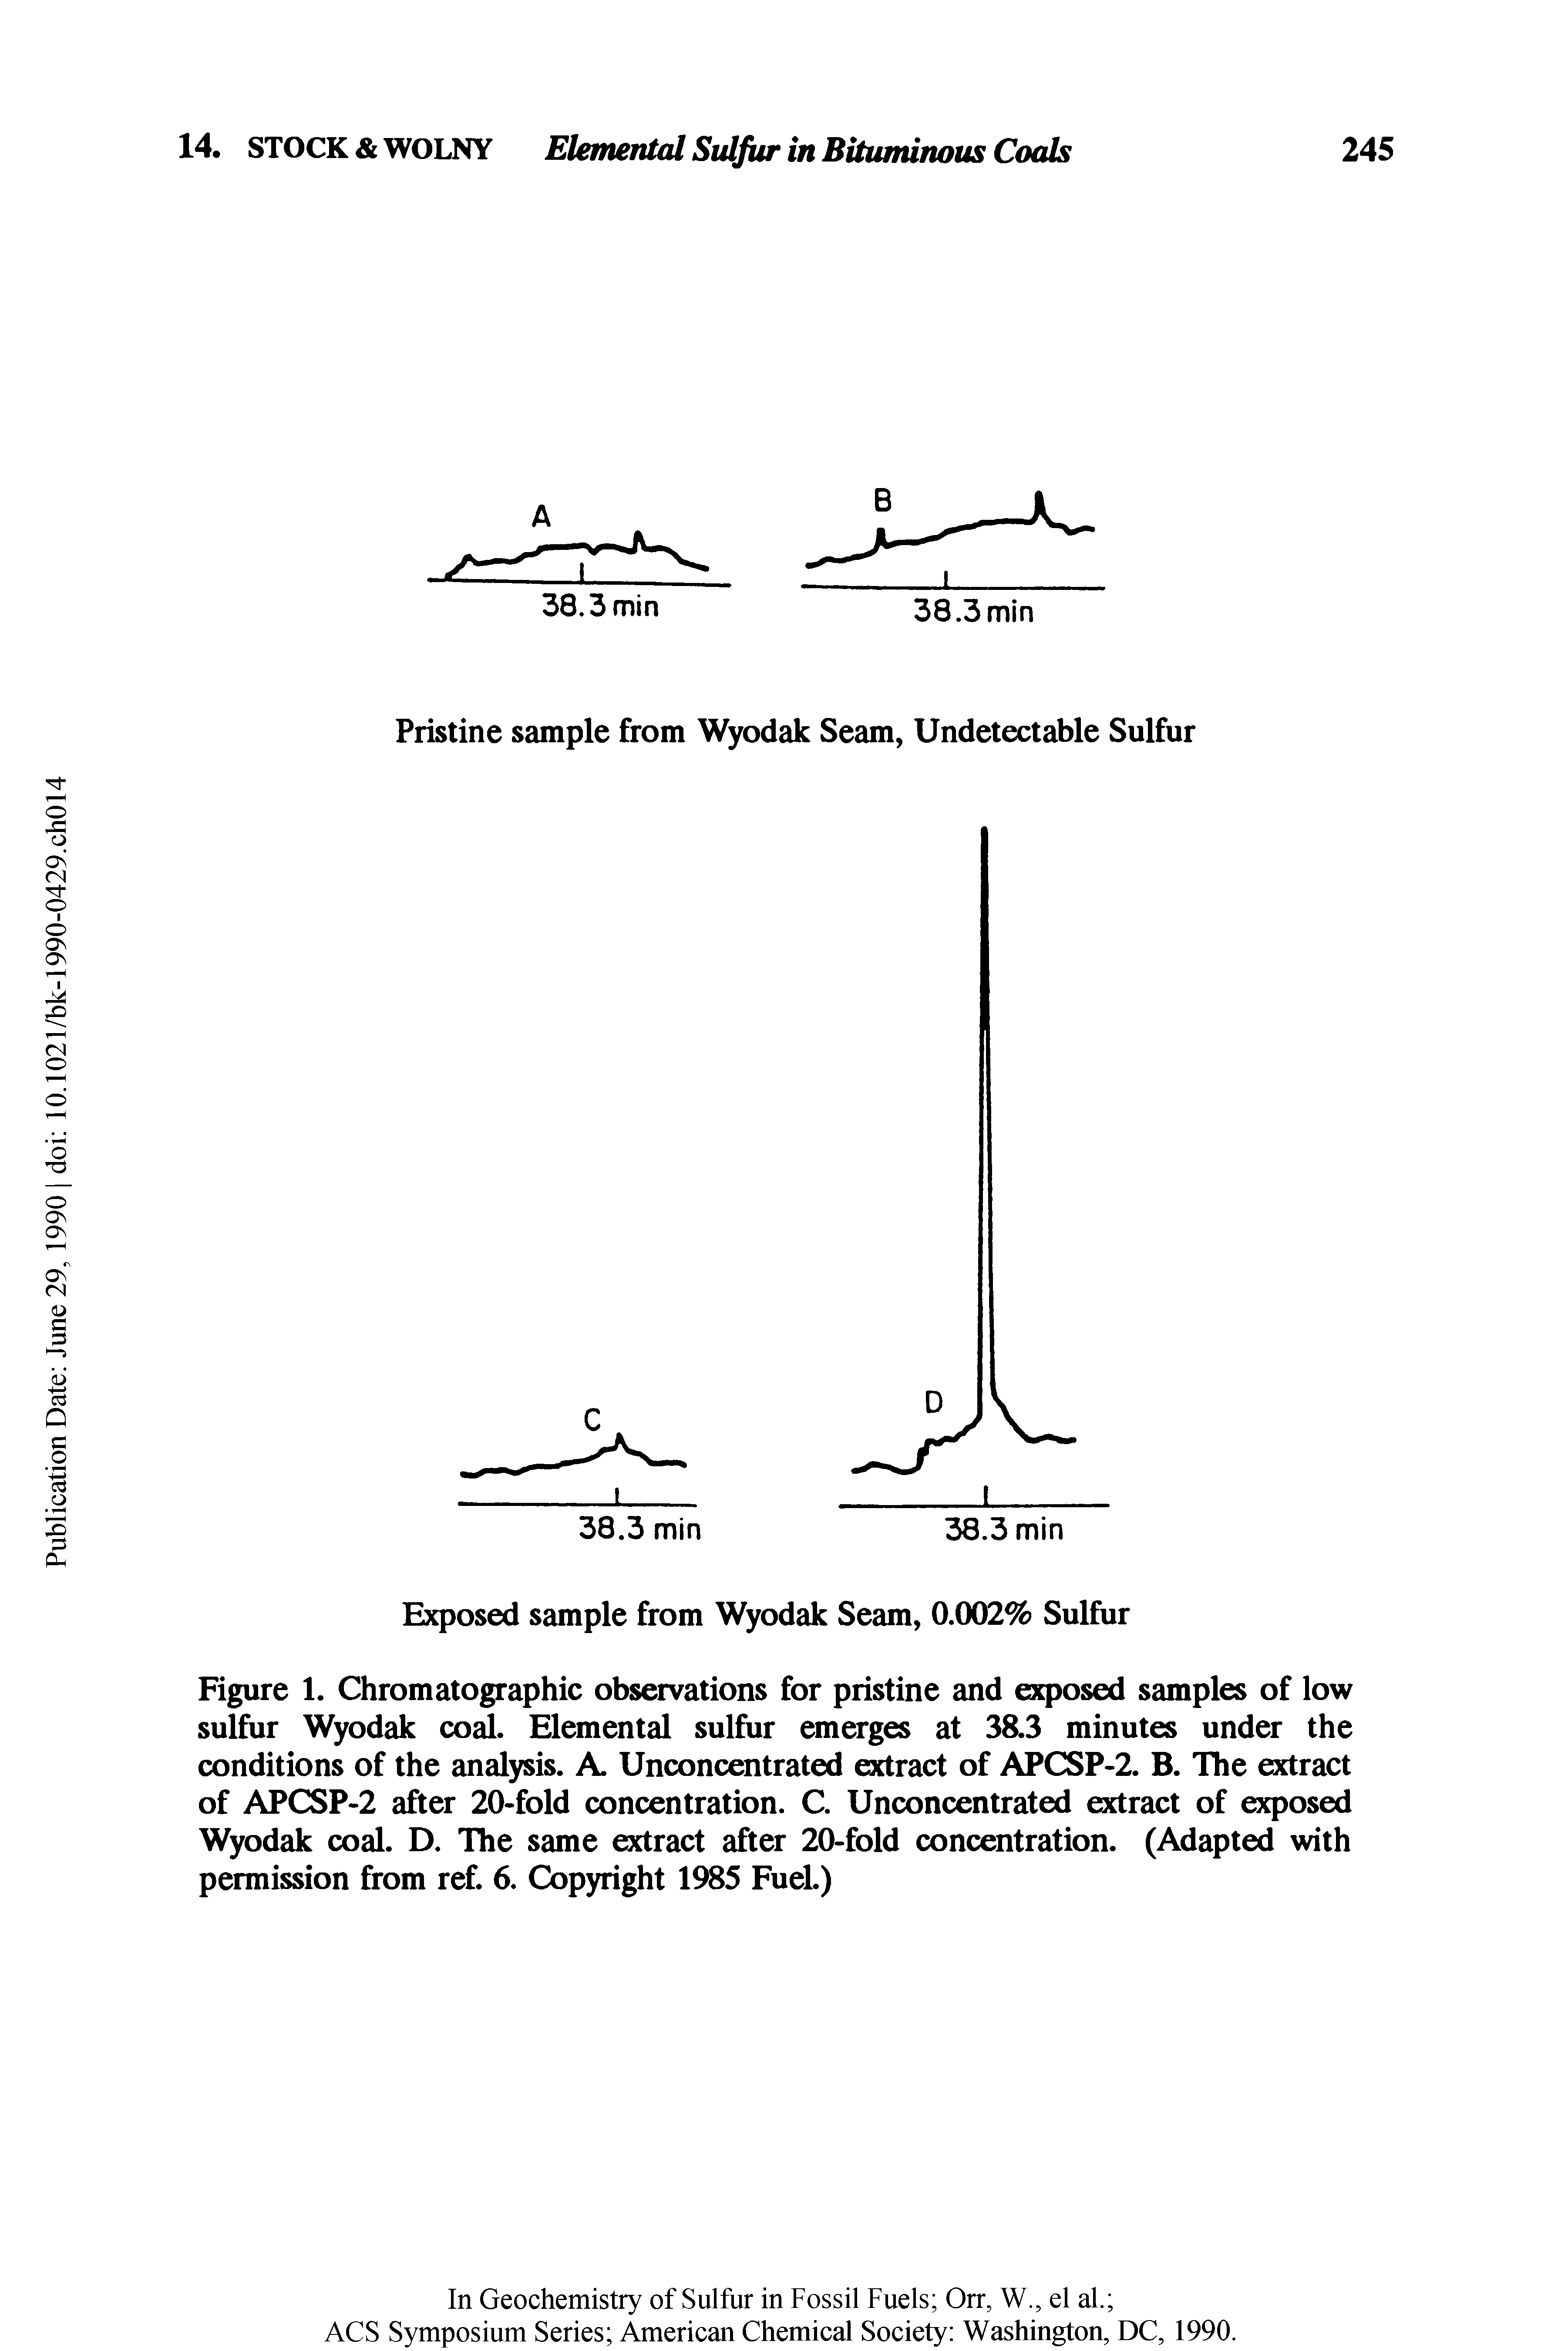 Figure 1. Chromatographic observations for pristine and exposed samples of low sulfur Wyodak coal. Elemental sulfur emerges at 38.3 minutes under the conditions of the analysis. A. Unconcentrated extract of APCSP-2. B. The extract of APCSP-2 after 20-fold concentration. C. Unconcentrated extract of exposed Wyodak coal. D. The same extract after 20-fold concentration. (Adapted with permission from ref. 6. Copyright 1985 Fuel.)...